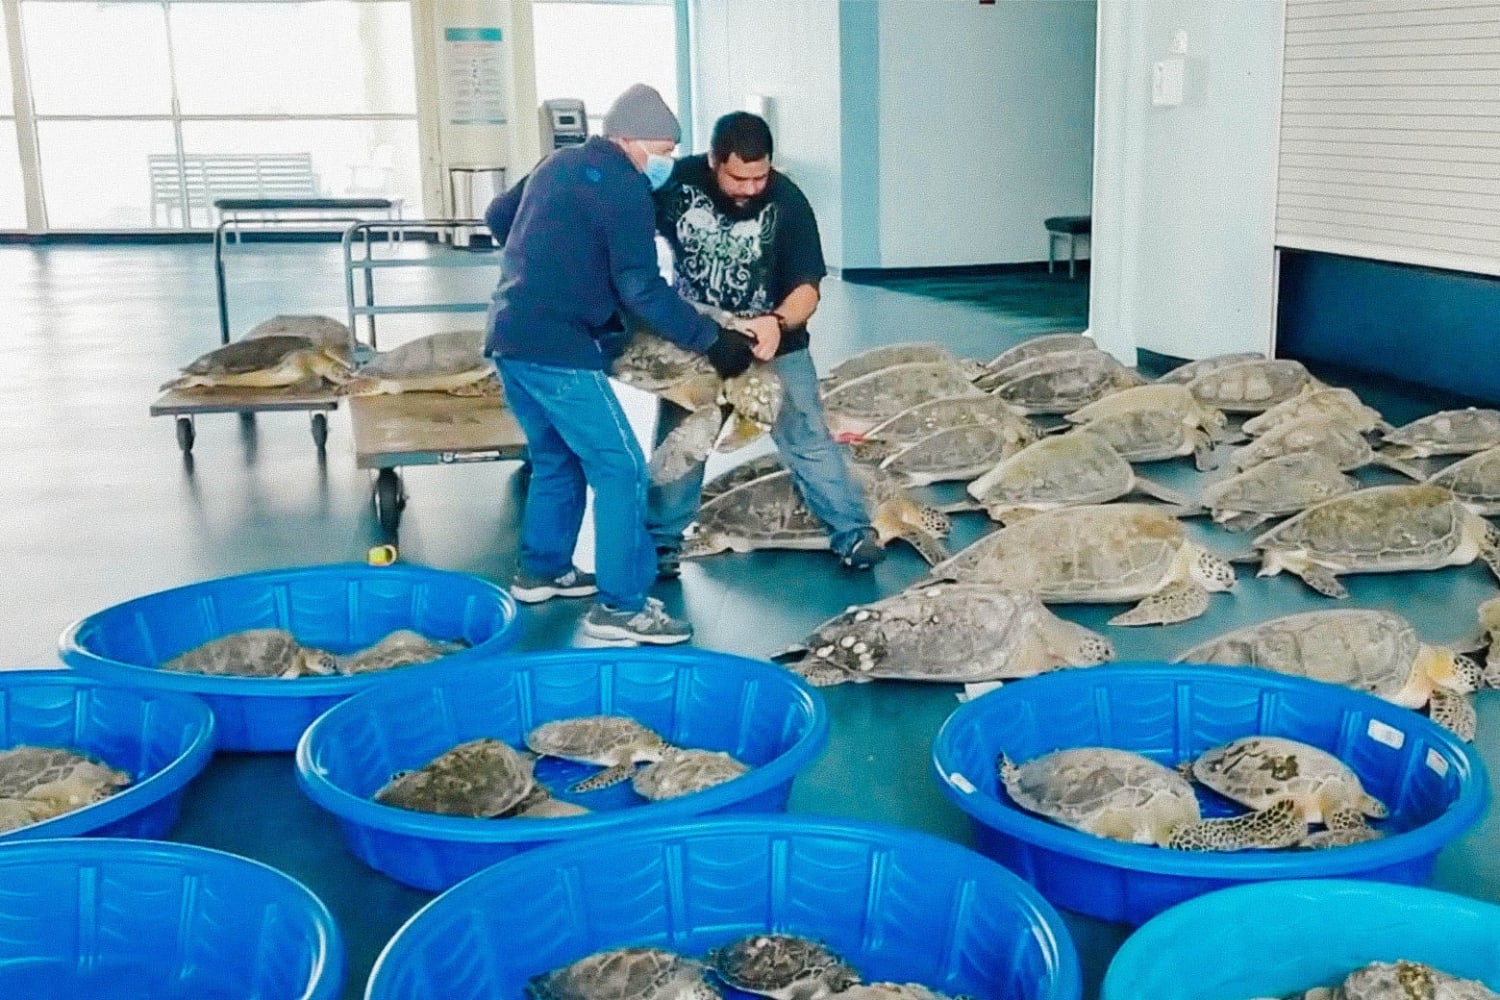 Texans Caught in the Blackout Are Rescuing Thousands of Sea Turtles From the Cold